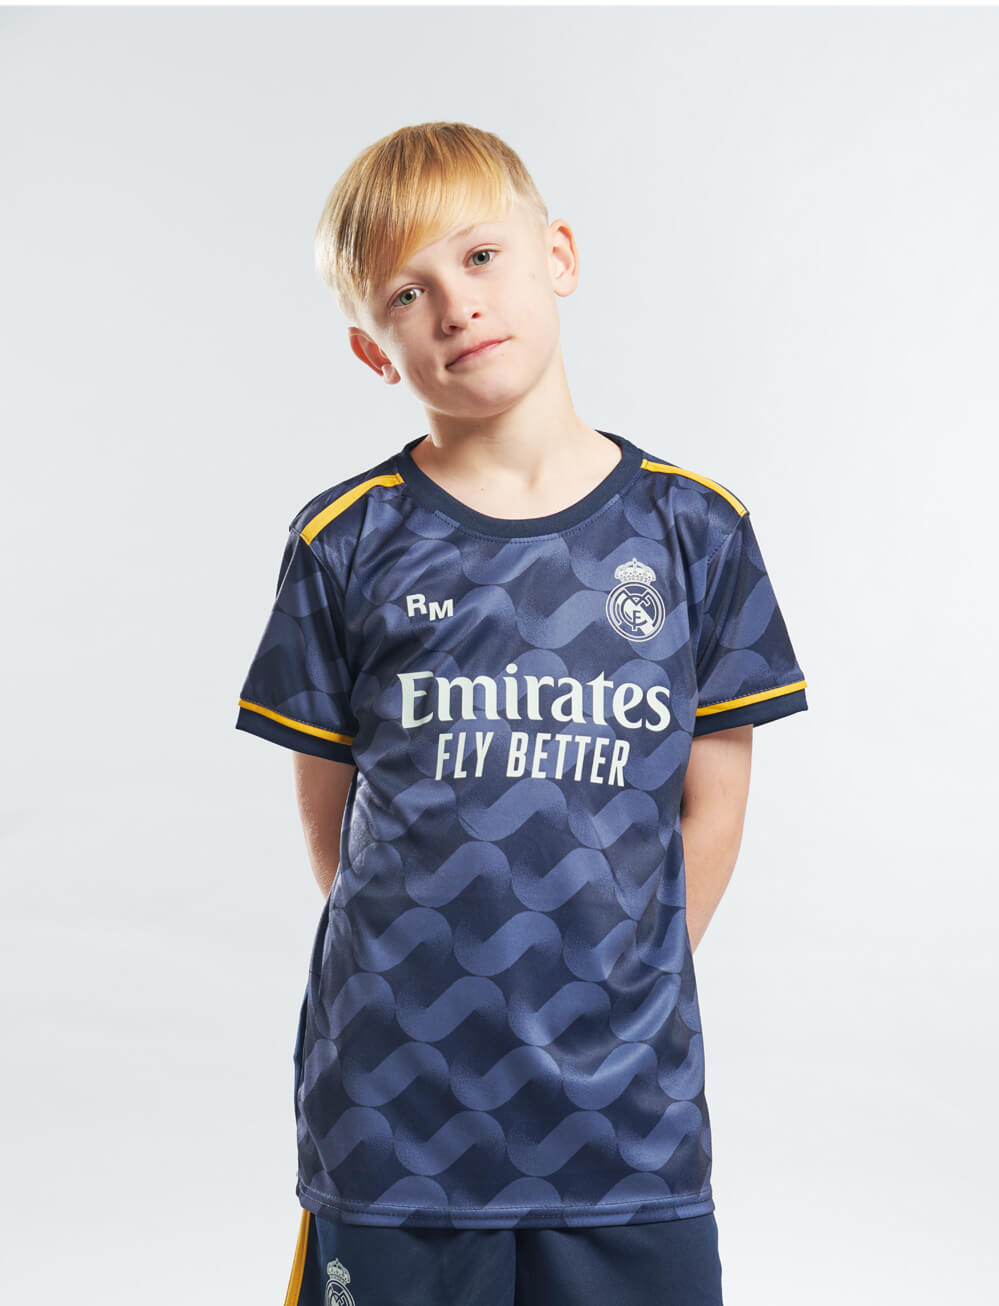 Official Real Madrid Kids Kit - Blue/Black - The World Football Store